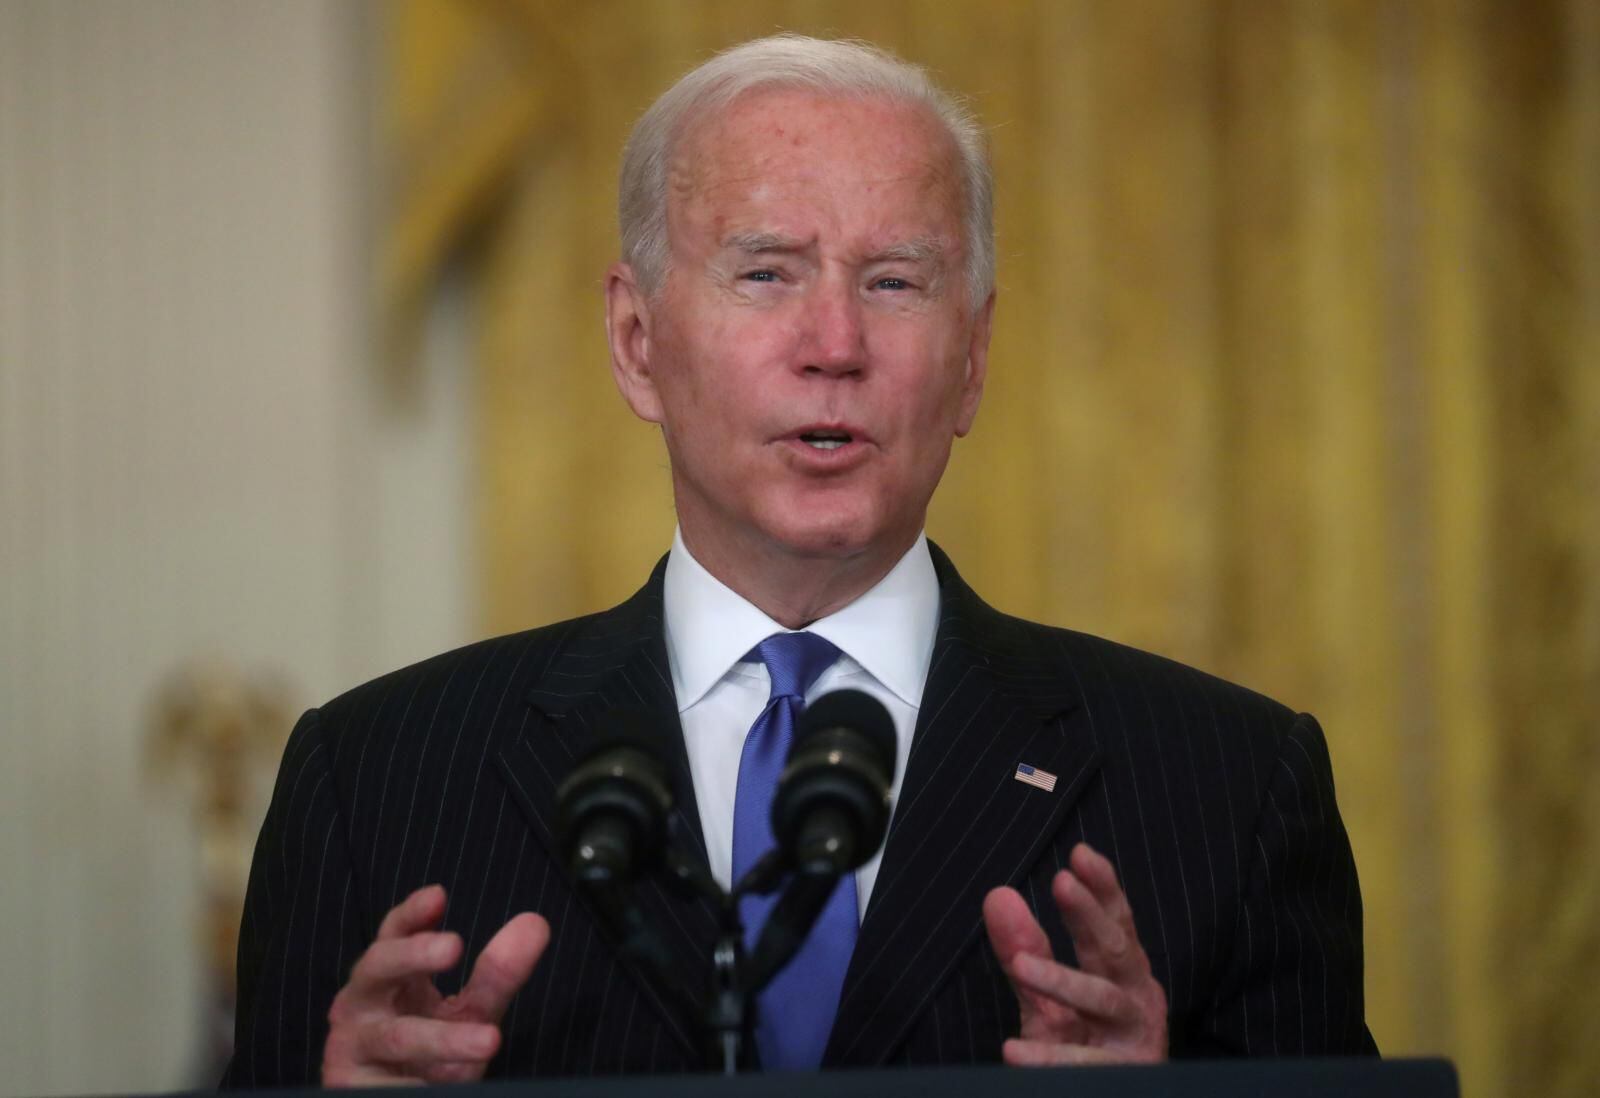 Over the past few days, Biden has been meeting with executives from mega-chains Walmart and Home Depot, as well as unions and other supply chain actors to alleviate bottlenecks at ports.  (Photo: Leah Millis / Reuters)